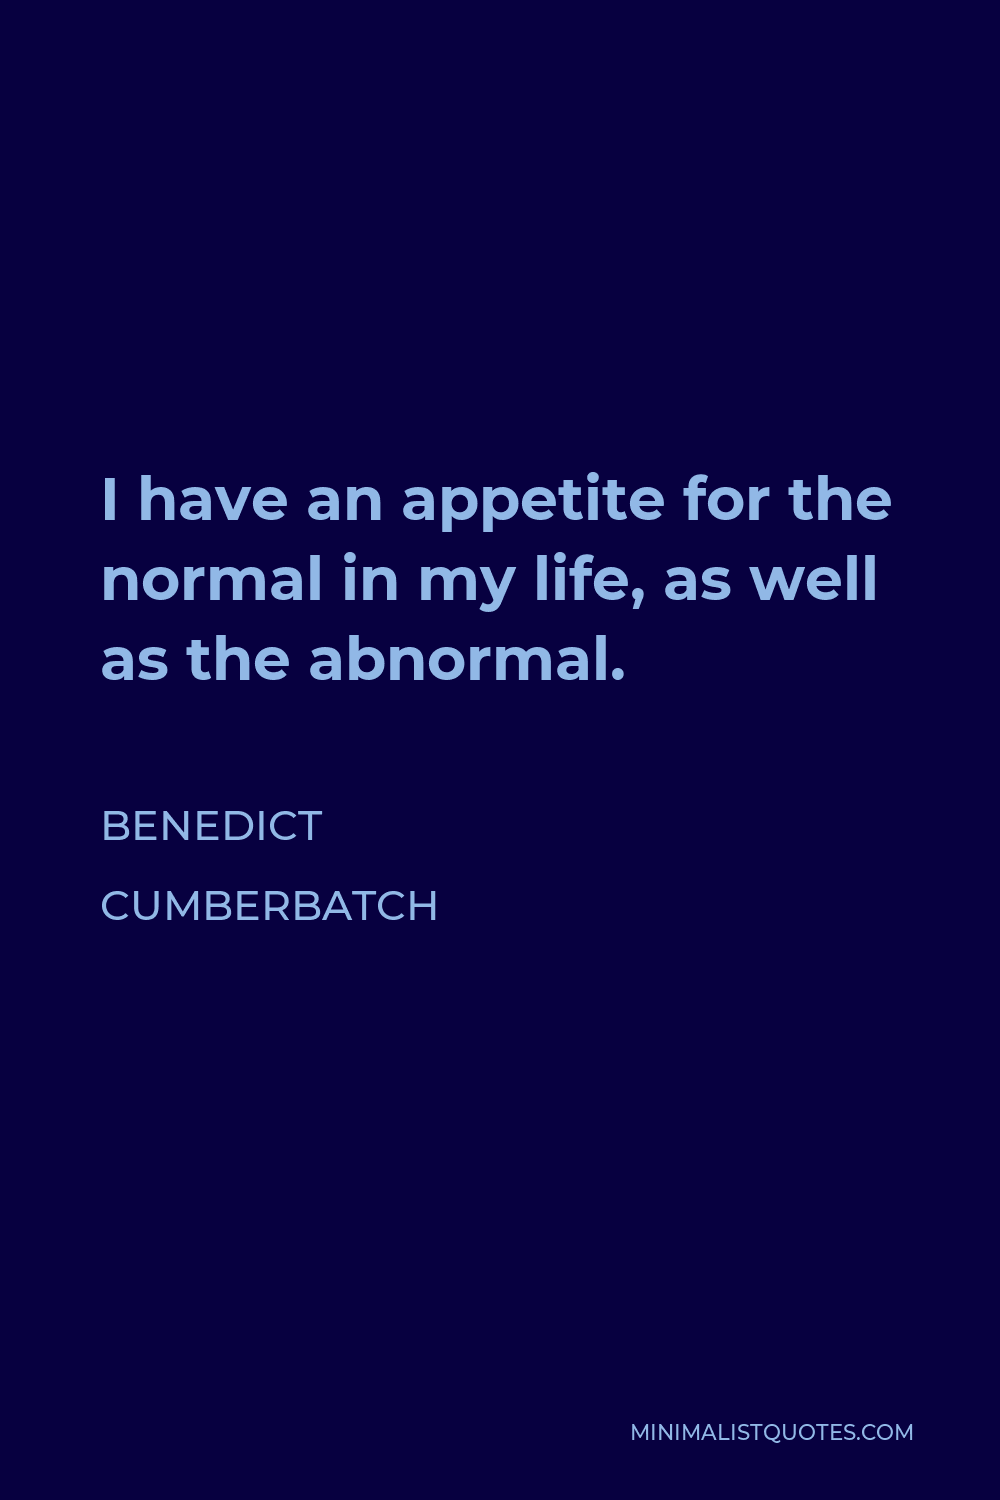 Benedict Cumberbatch Quote - I have an appetite for the normal in my life, as well as the abnormal.